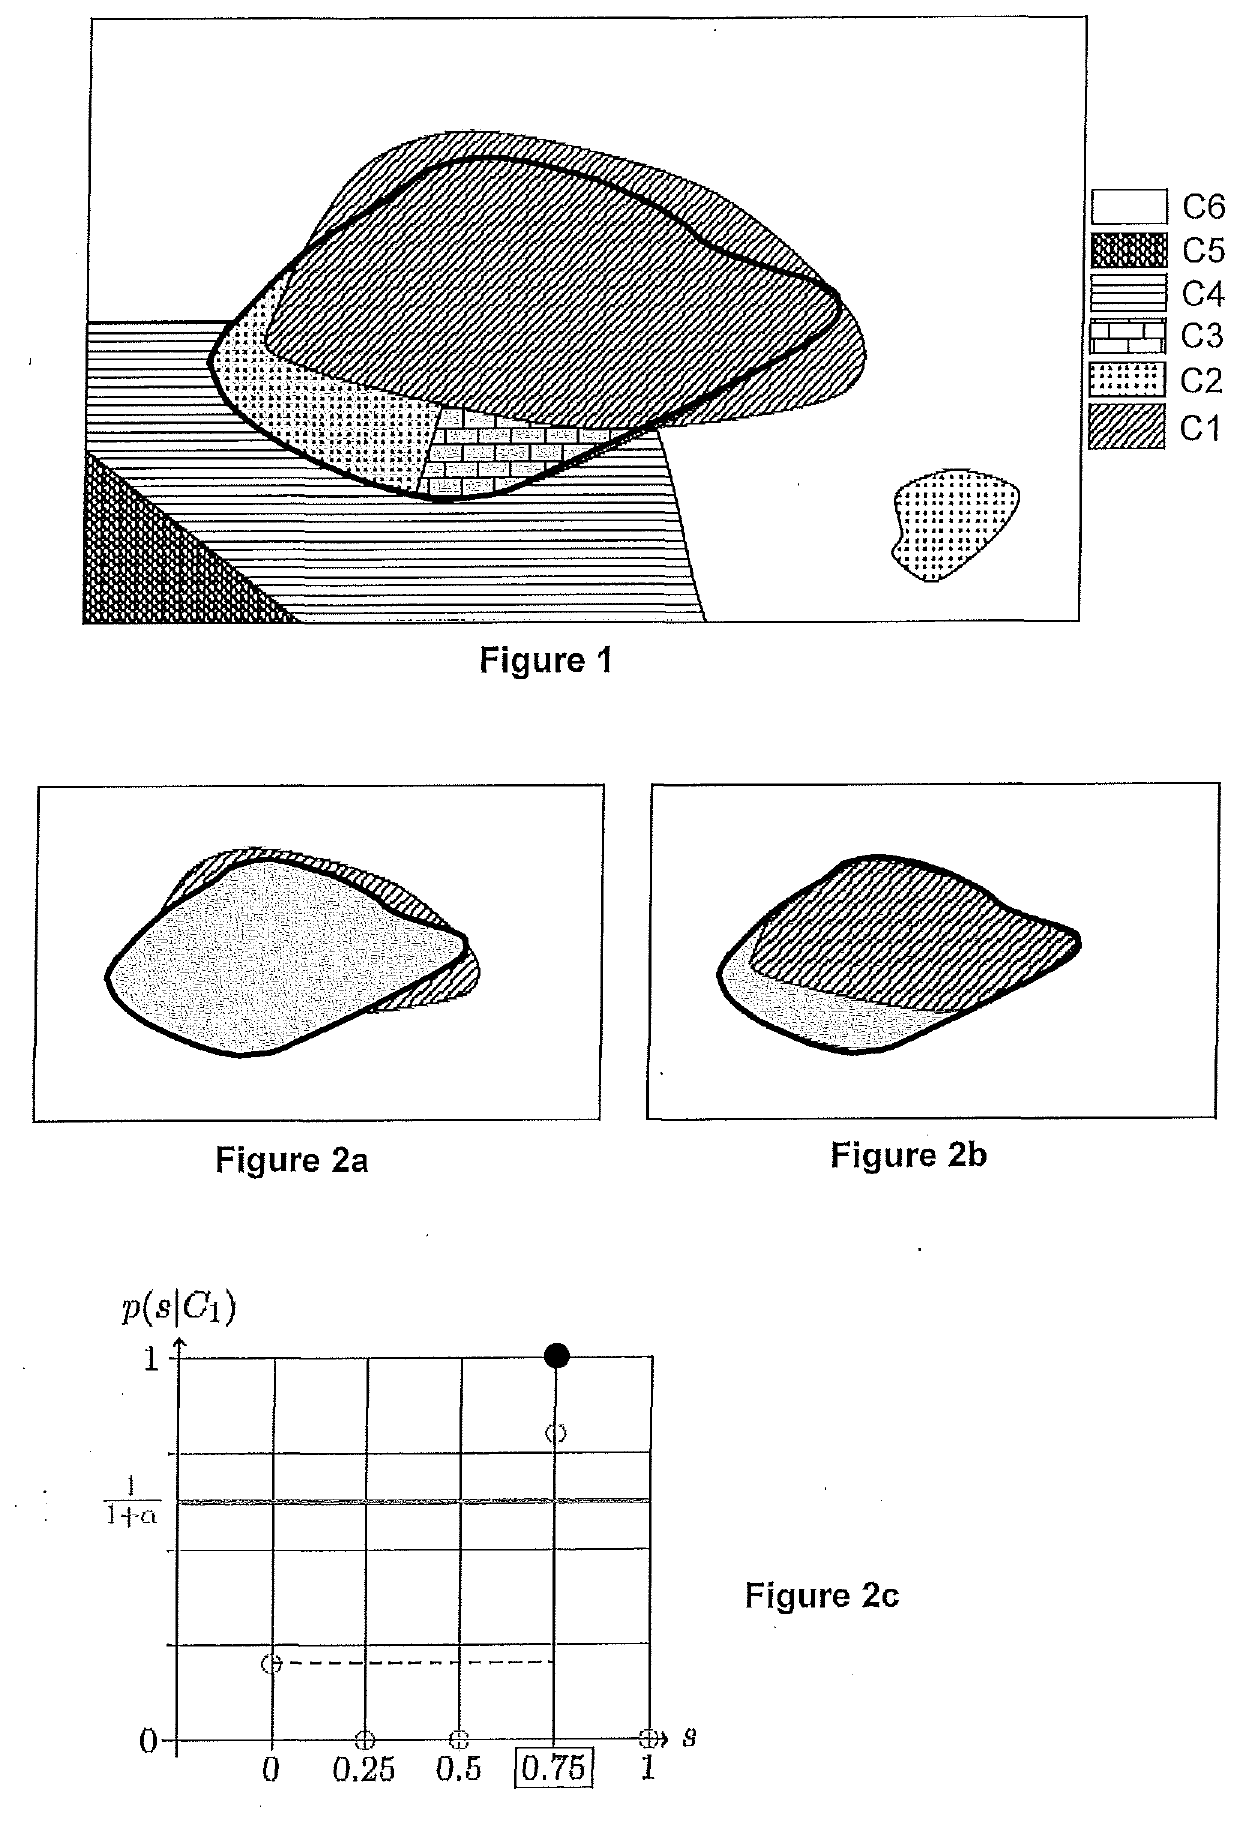 Method for detecting geological objects in a seismic image